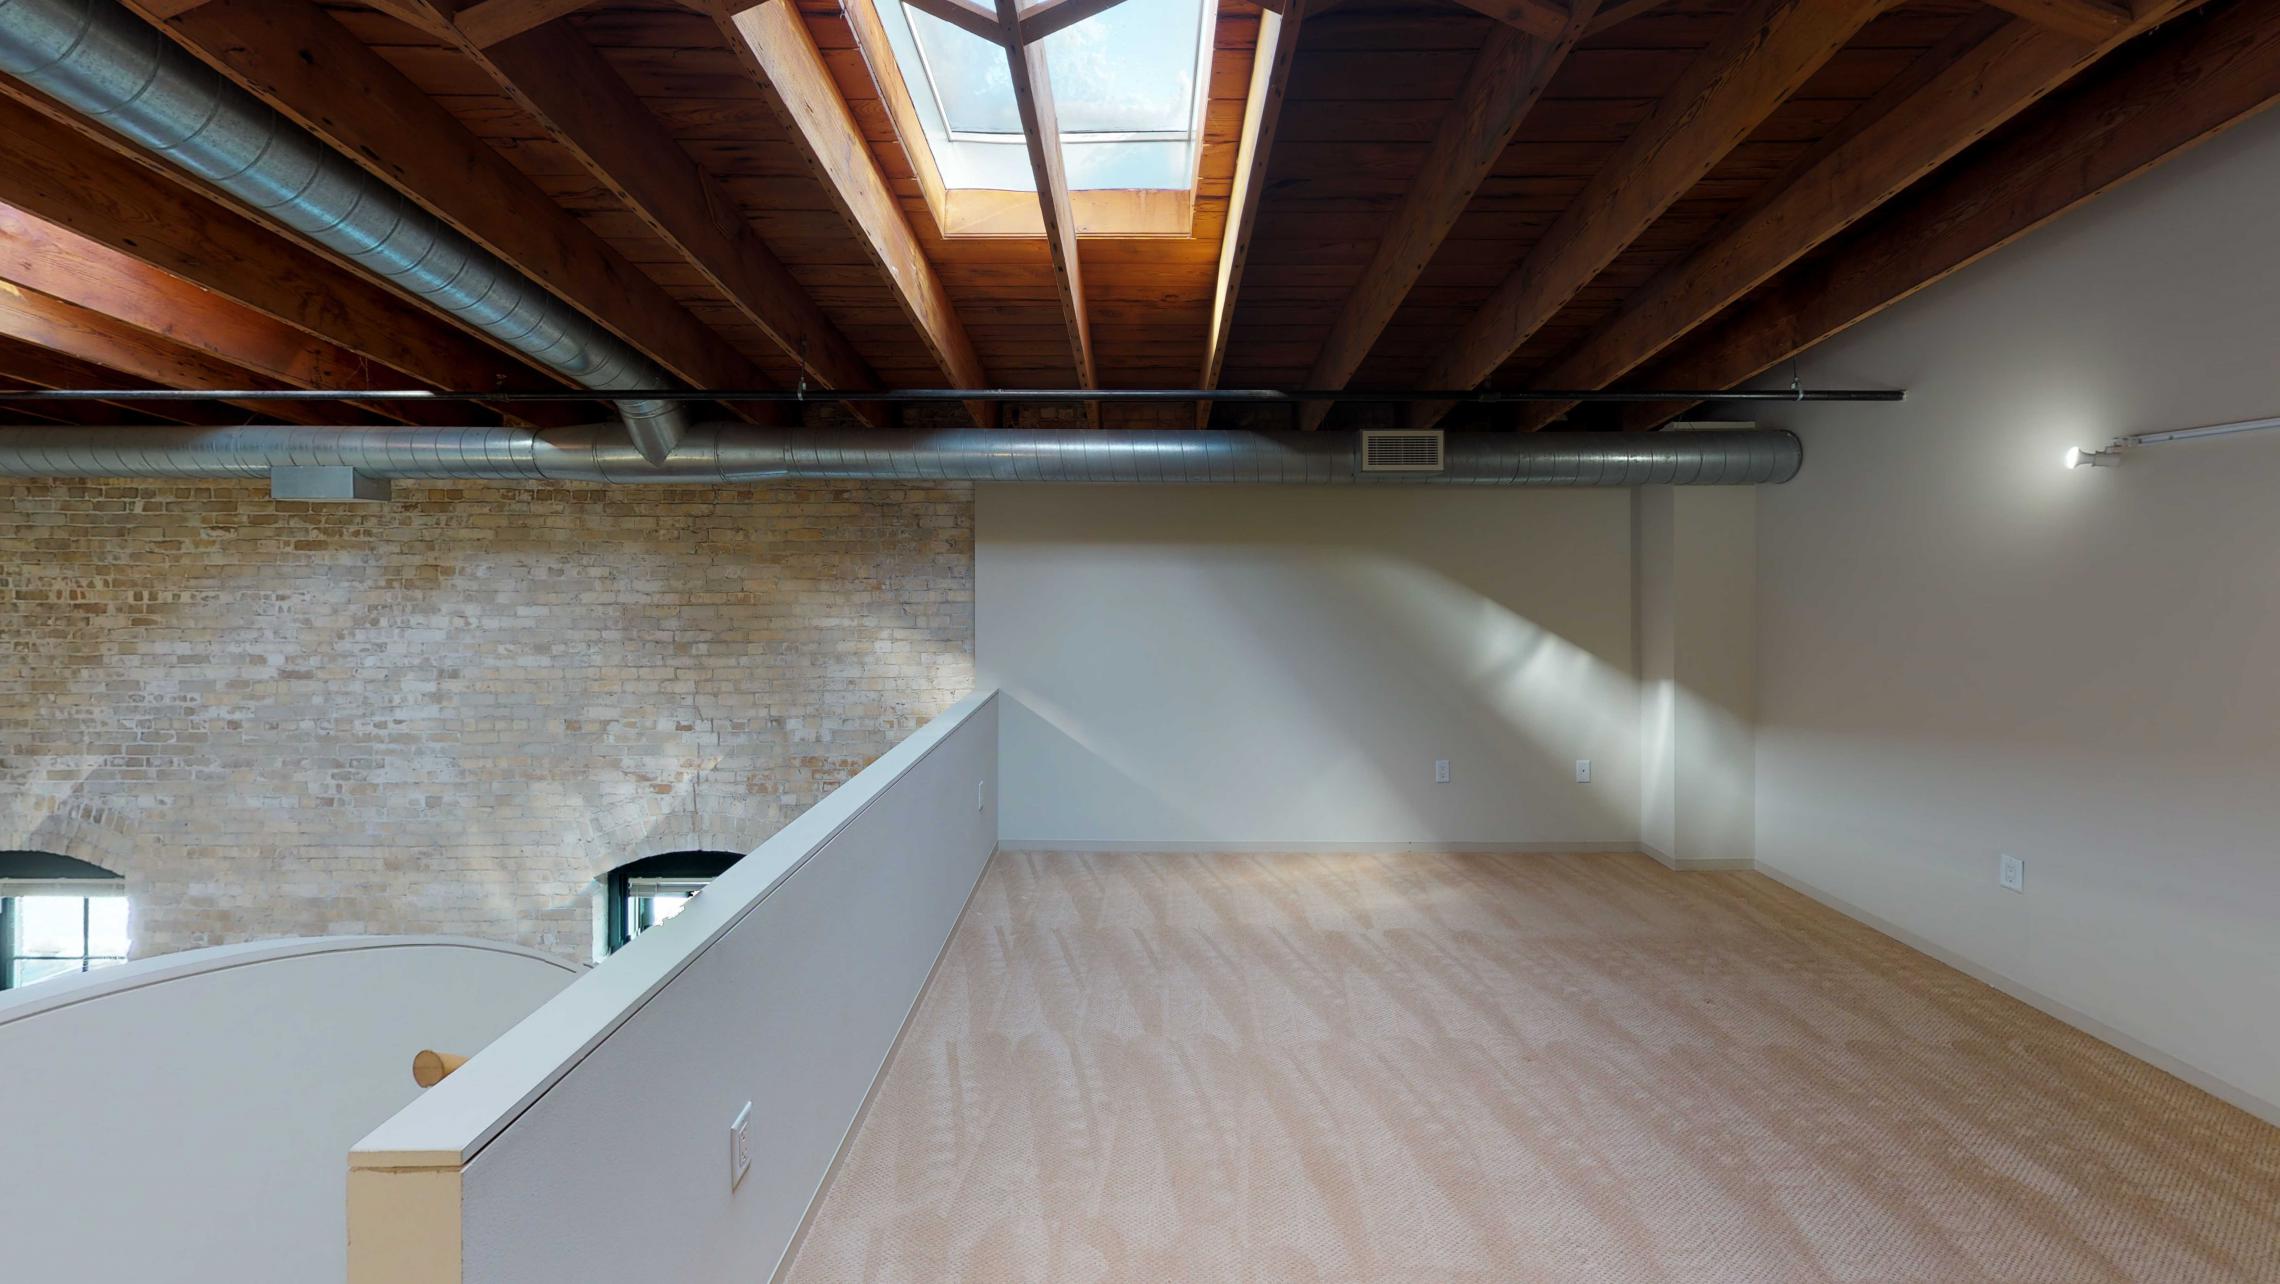 Tobacco-Lofts-E307-Lofted-Two-Bedroom-Downtown-Madison-Luxury-Apartments-Yards-Exposures-Skylight.jpg